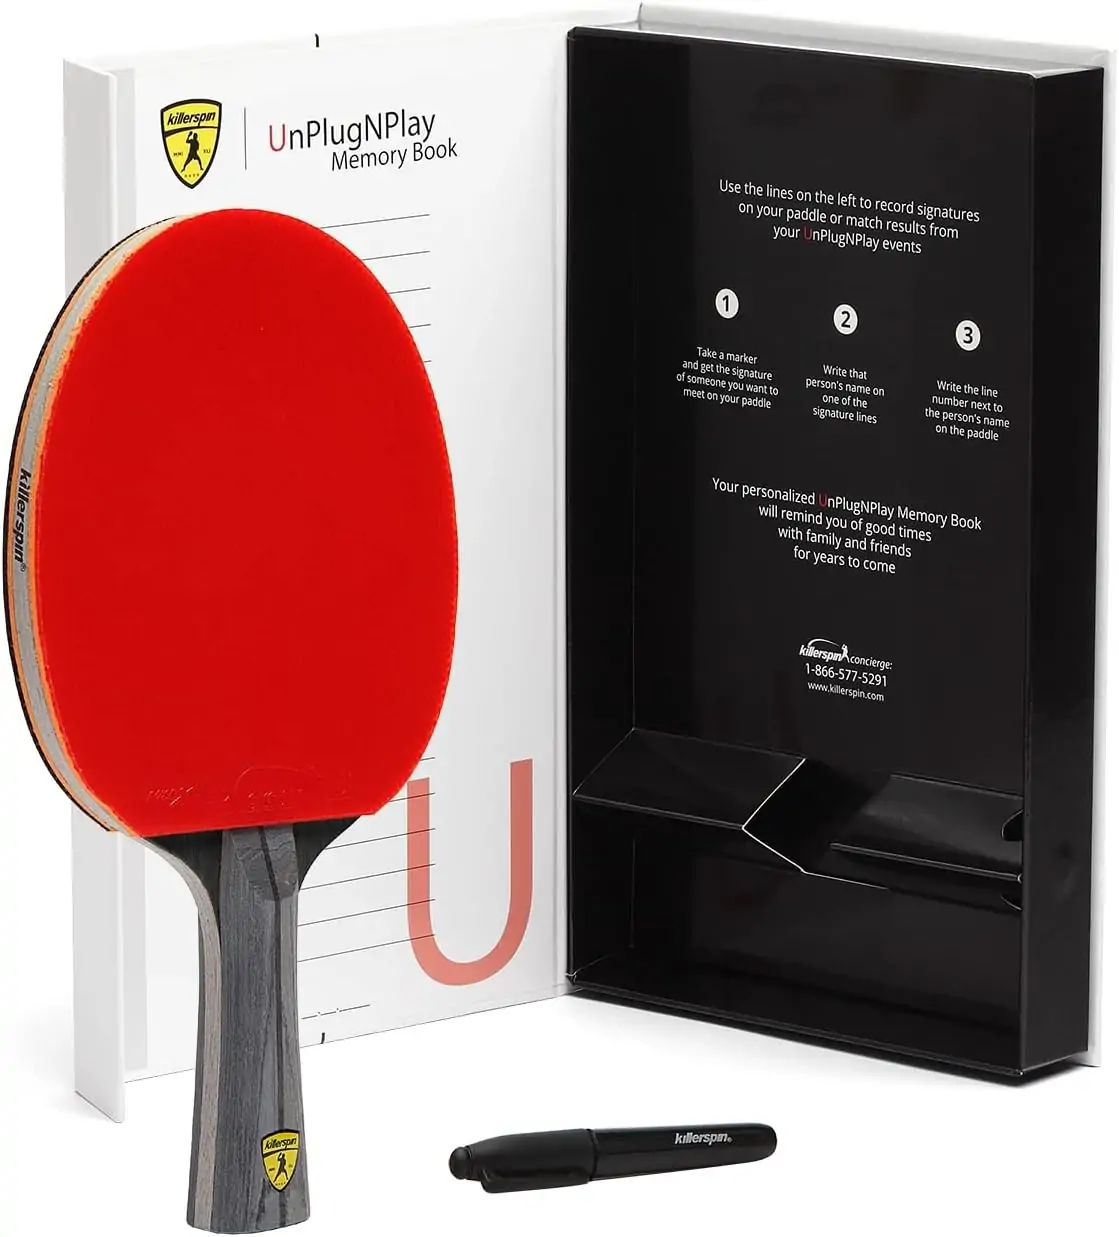 Killerspin Jet 600 Spin N2 Ping Pong Paddle Review